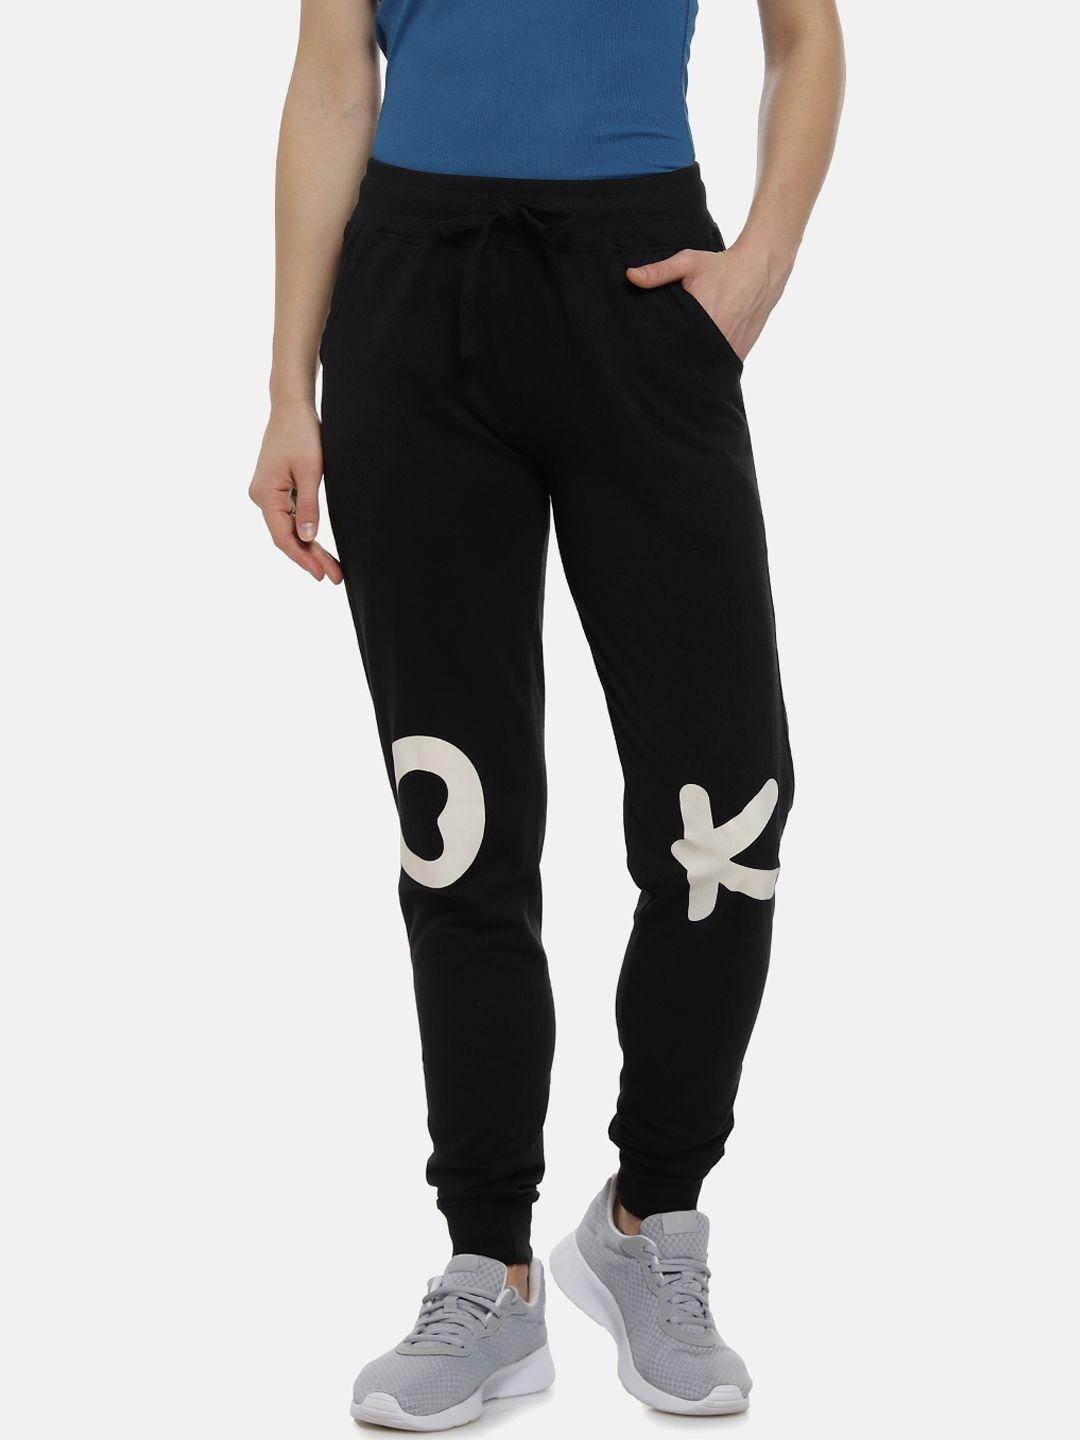 campus sutra women black & white printed track pants